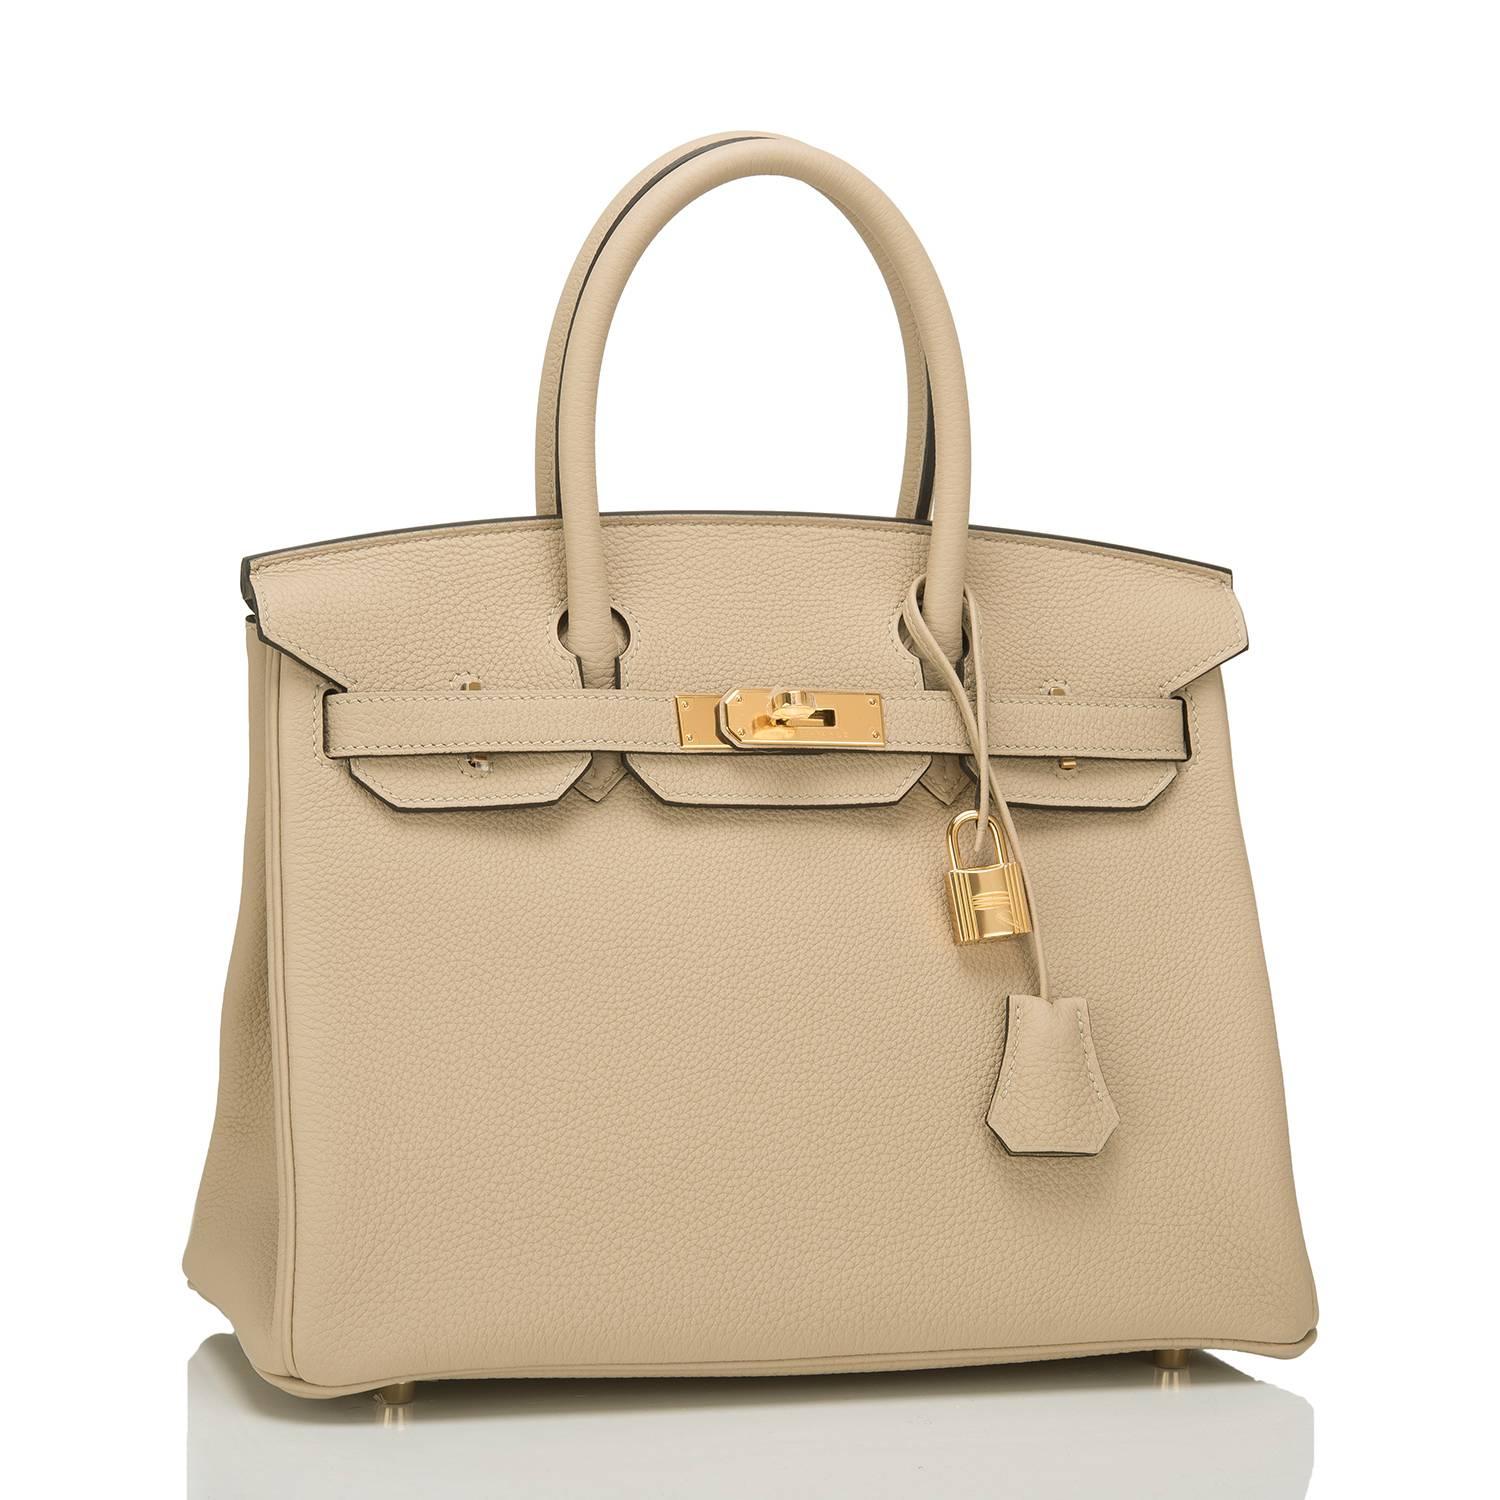 Hermes Trench Birkin 30cm of Togo leather with gold hardware.

This Birkin has tonal stitching, a front toggle closure, a clochette with lock and two keys, and double rolled handles.

The interior is lined with Trench chevre and has one zip